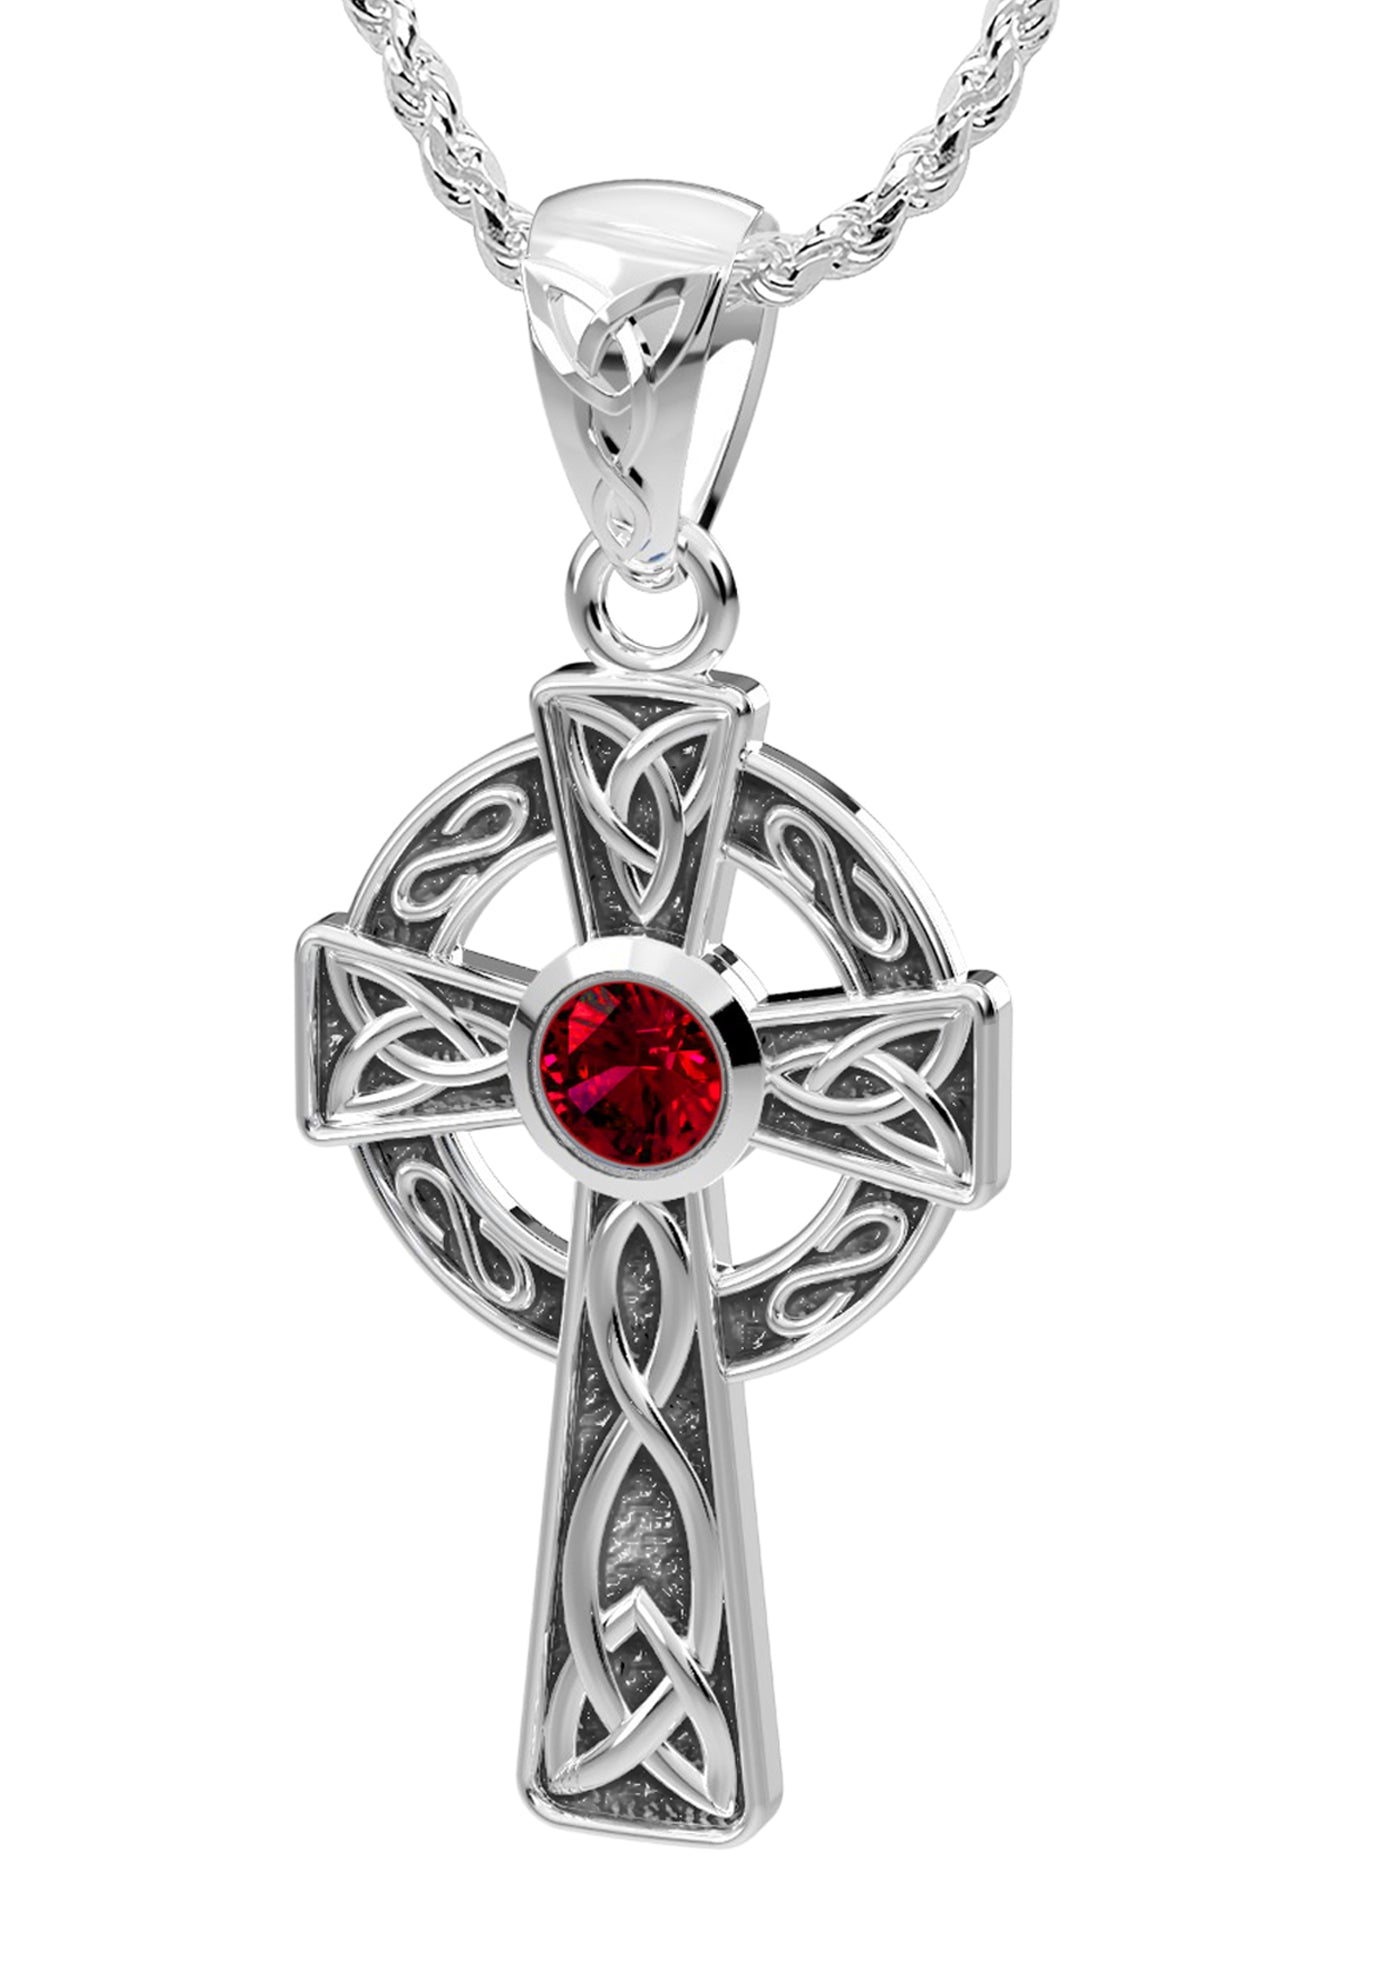 Celtic Cross with Knotsª Two Tone Sterling Silver Cremation Pendant